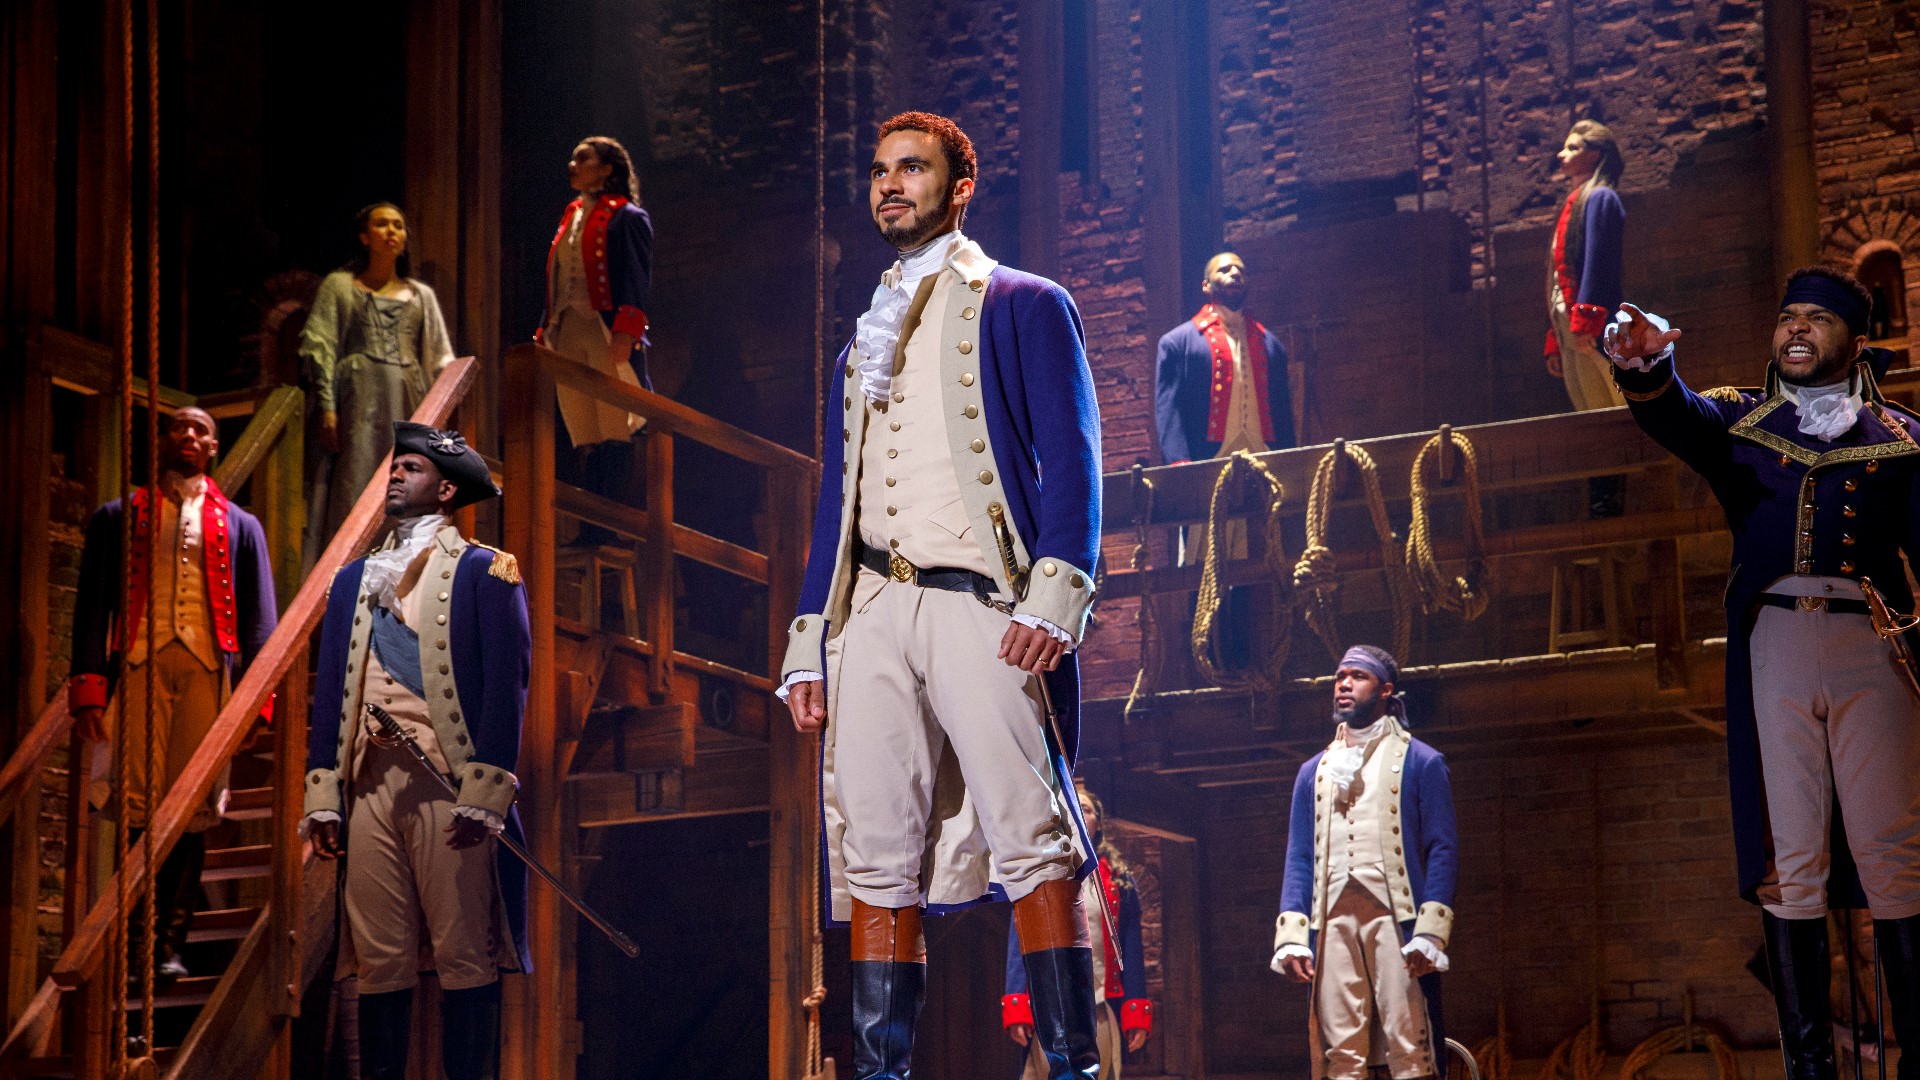 The National Tour of the Broadway production of the musical Hamilton returns to Denver, Colorado from Aug. 12 to Oct. 4, 2020.